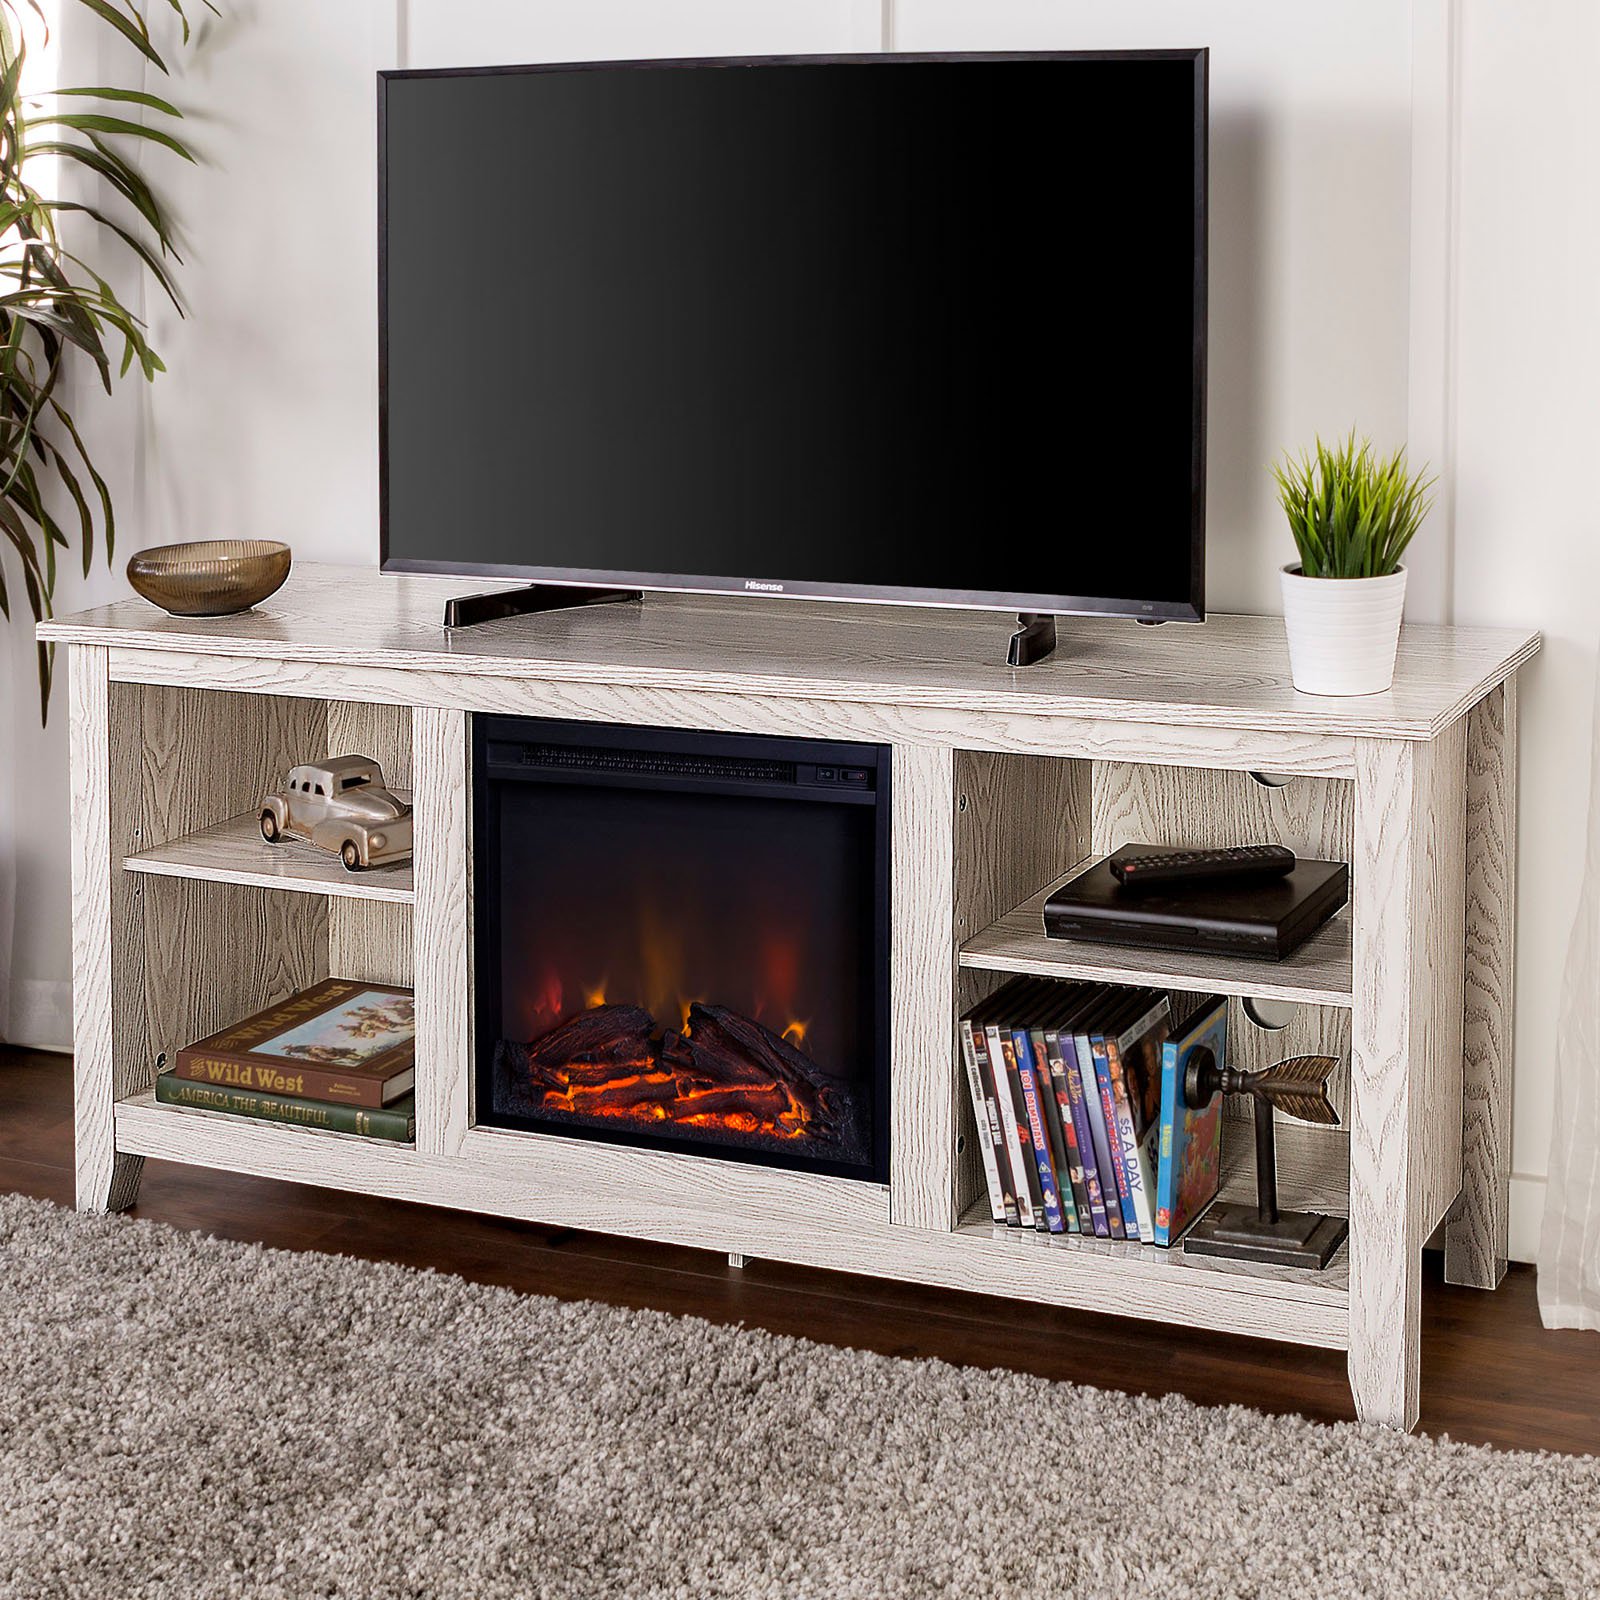 White Fireplace Tv Stand Best Of Walker Edison Fireplace Tv Stand White Wash In 2019